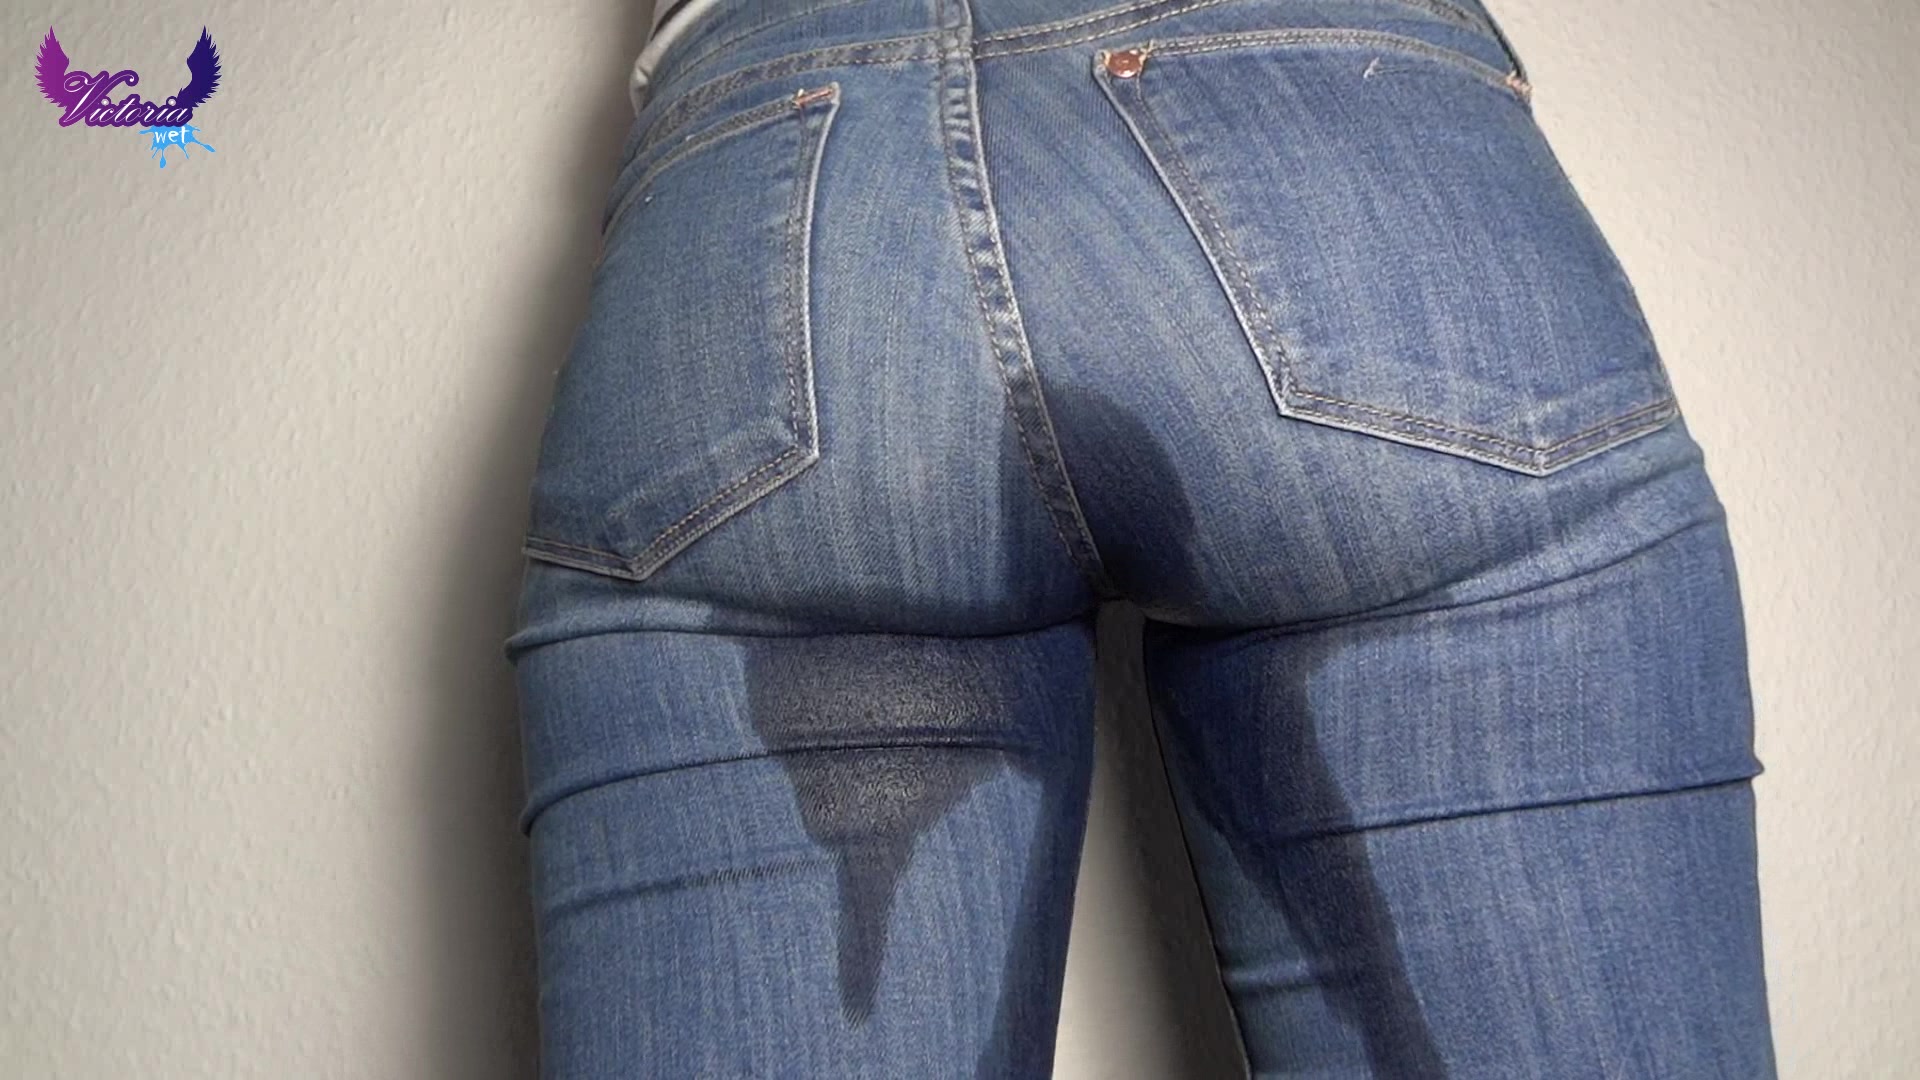 Girl peeing in her jeans - Jeans Wetting